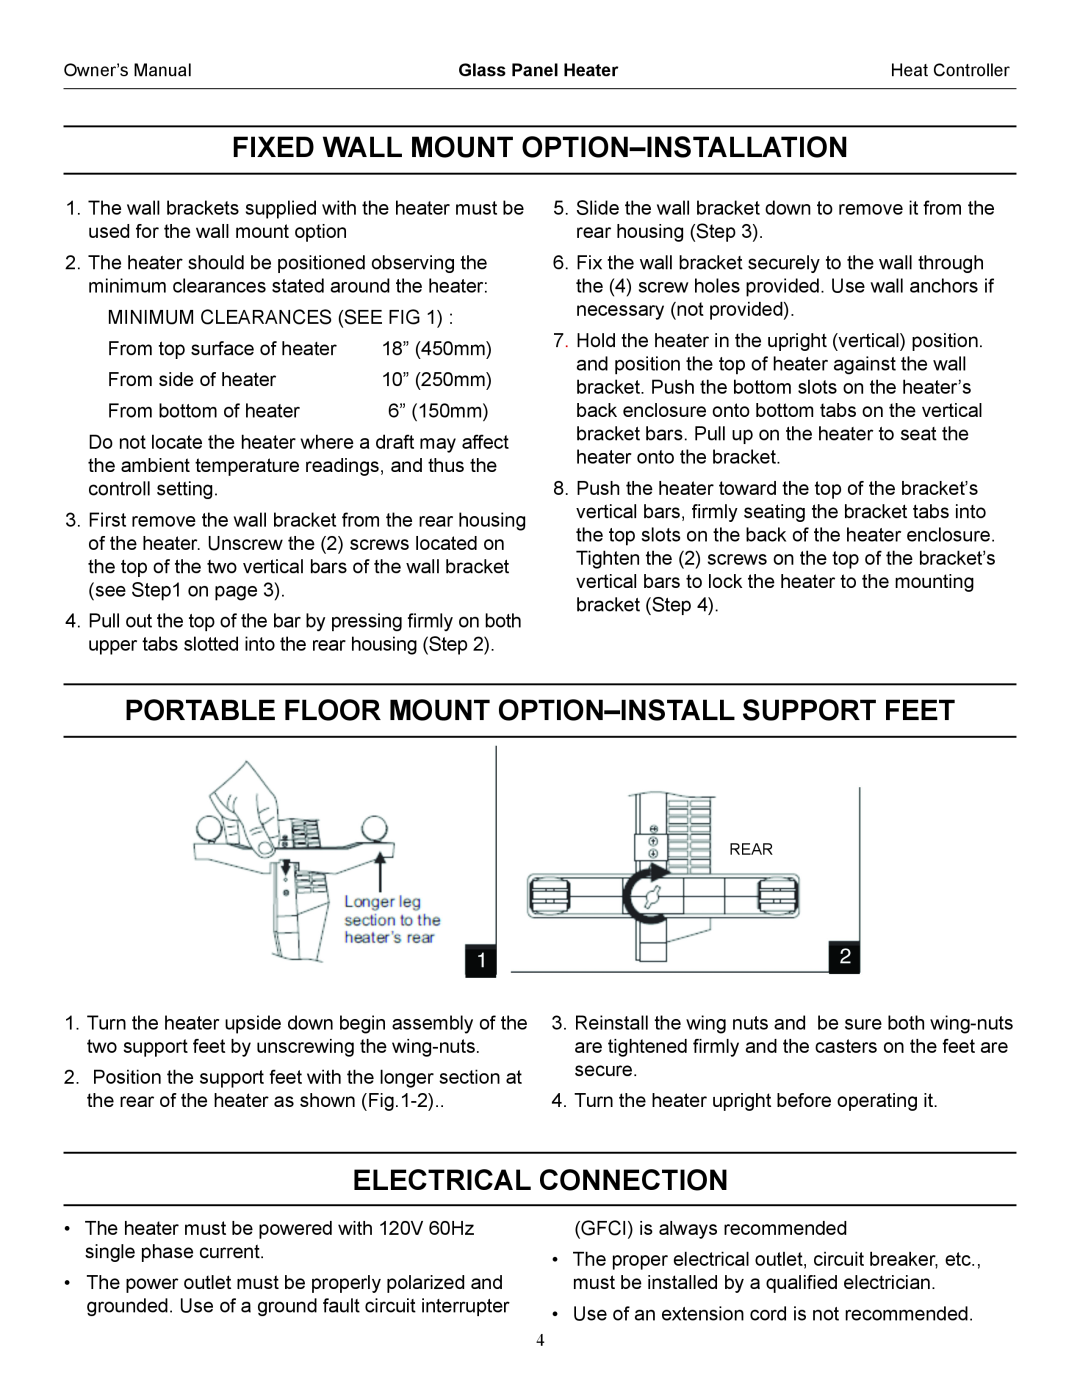 Heat Controller IRGPH15B operation manual Portable Floor Mount Option-Installsupport Feet, Electrical Connection 